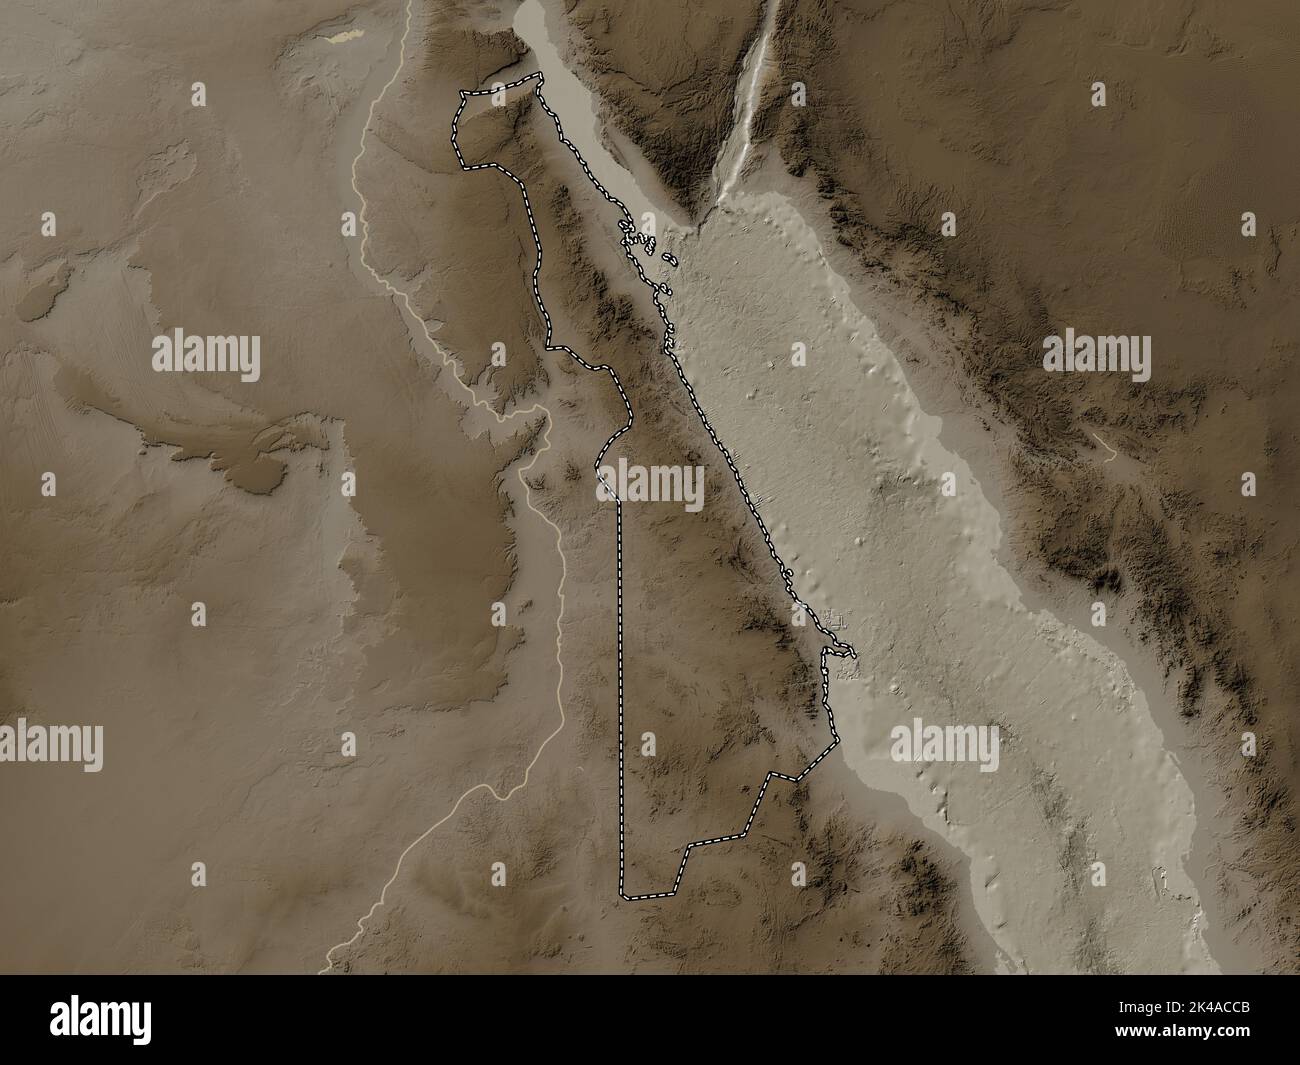 Al Bahr al Ahmar, governorate of Egypt. Elevation map colored in sepia tones with lakes and rivers Stock Photo